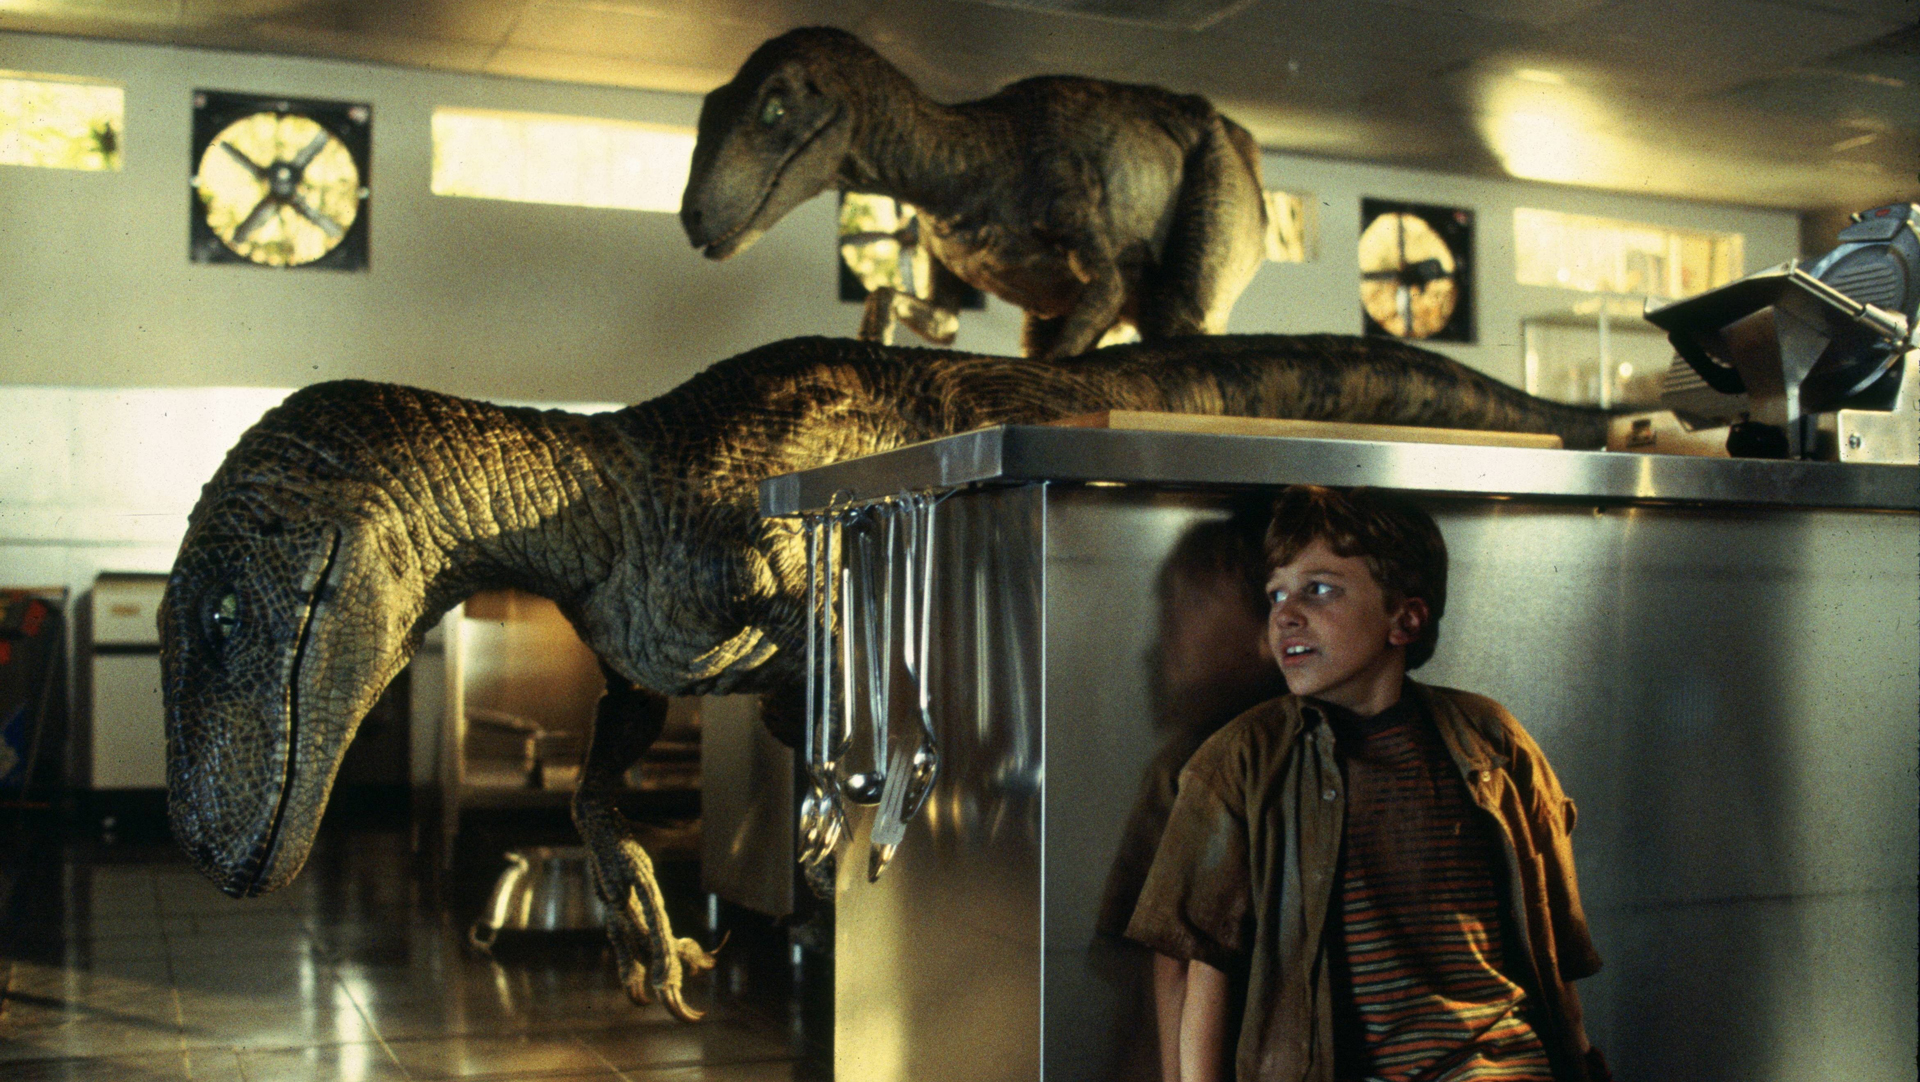 The raptors in the kitchen scene was filmed on Joseph Mazzello's birthday. Due to a misunderstanding, Joseph ran into one of the raptors on one of the takes and was injured.